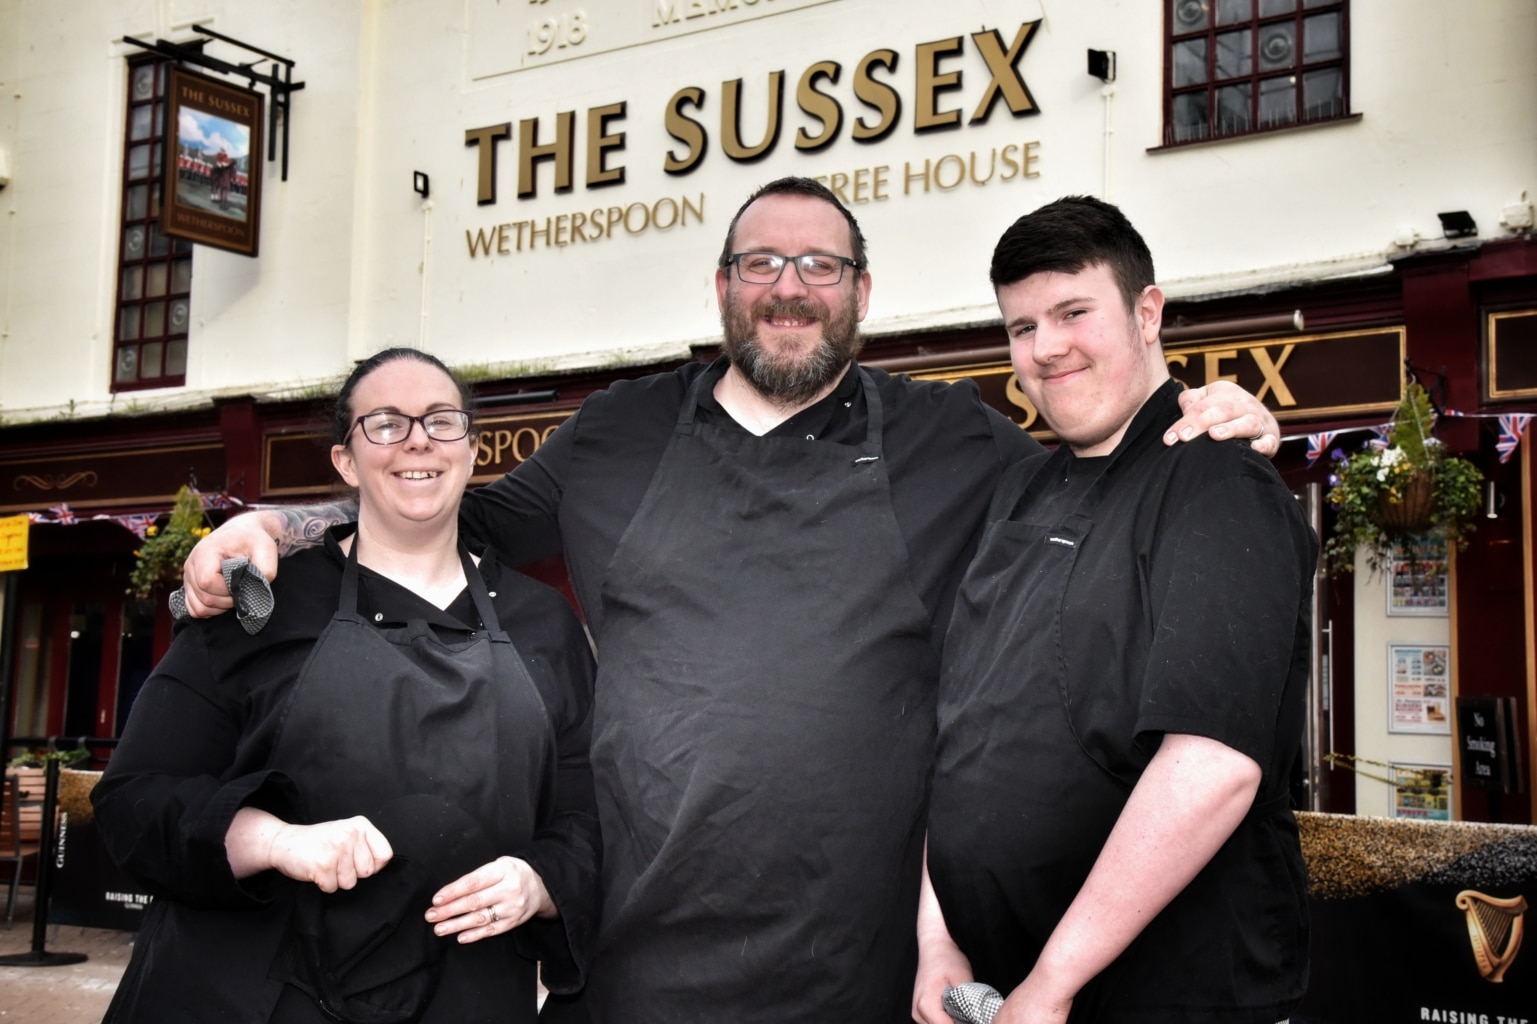 John has been celebrating 20 years with Wetherspoon, having risen through the ranks to become kitchen manager at The Sussex.